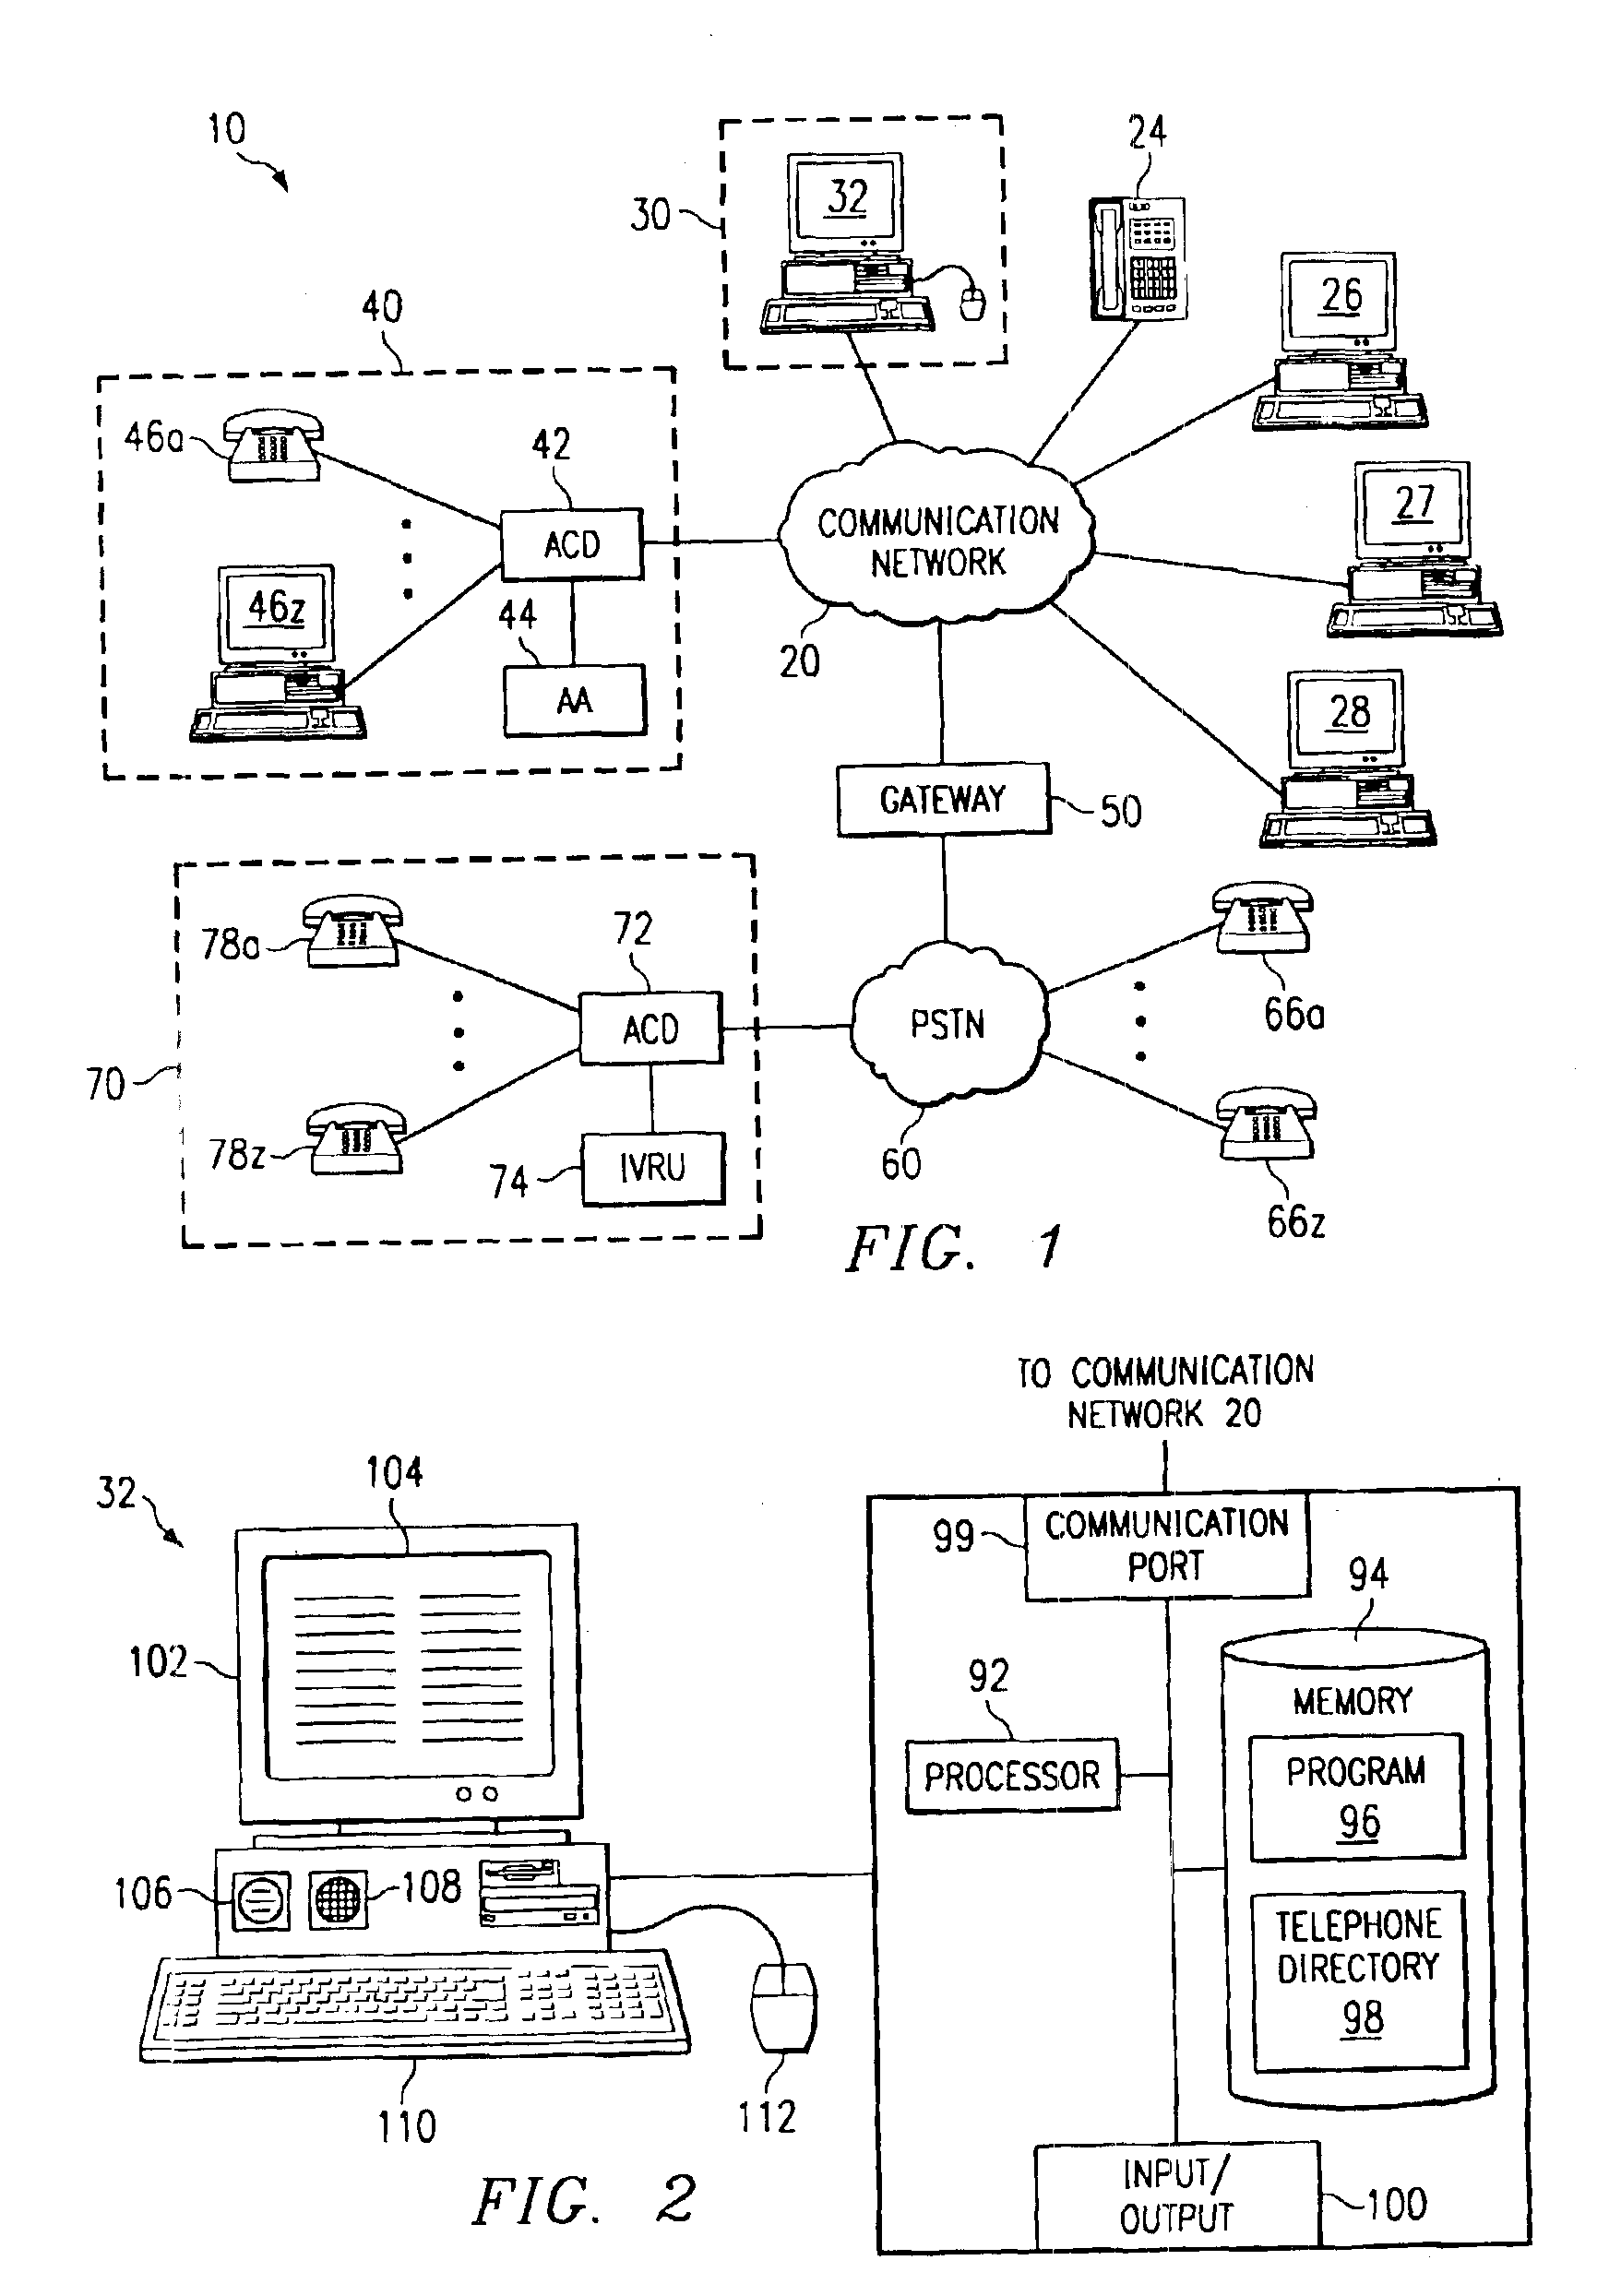 System and method for placing a telephone call